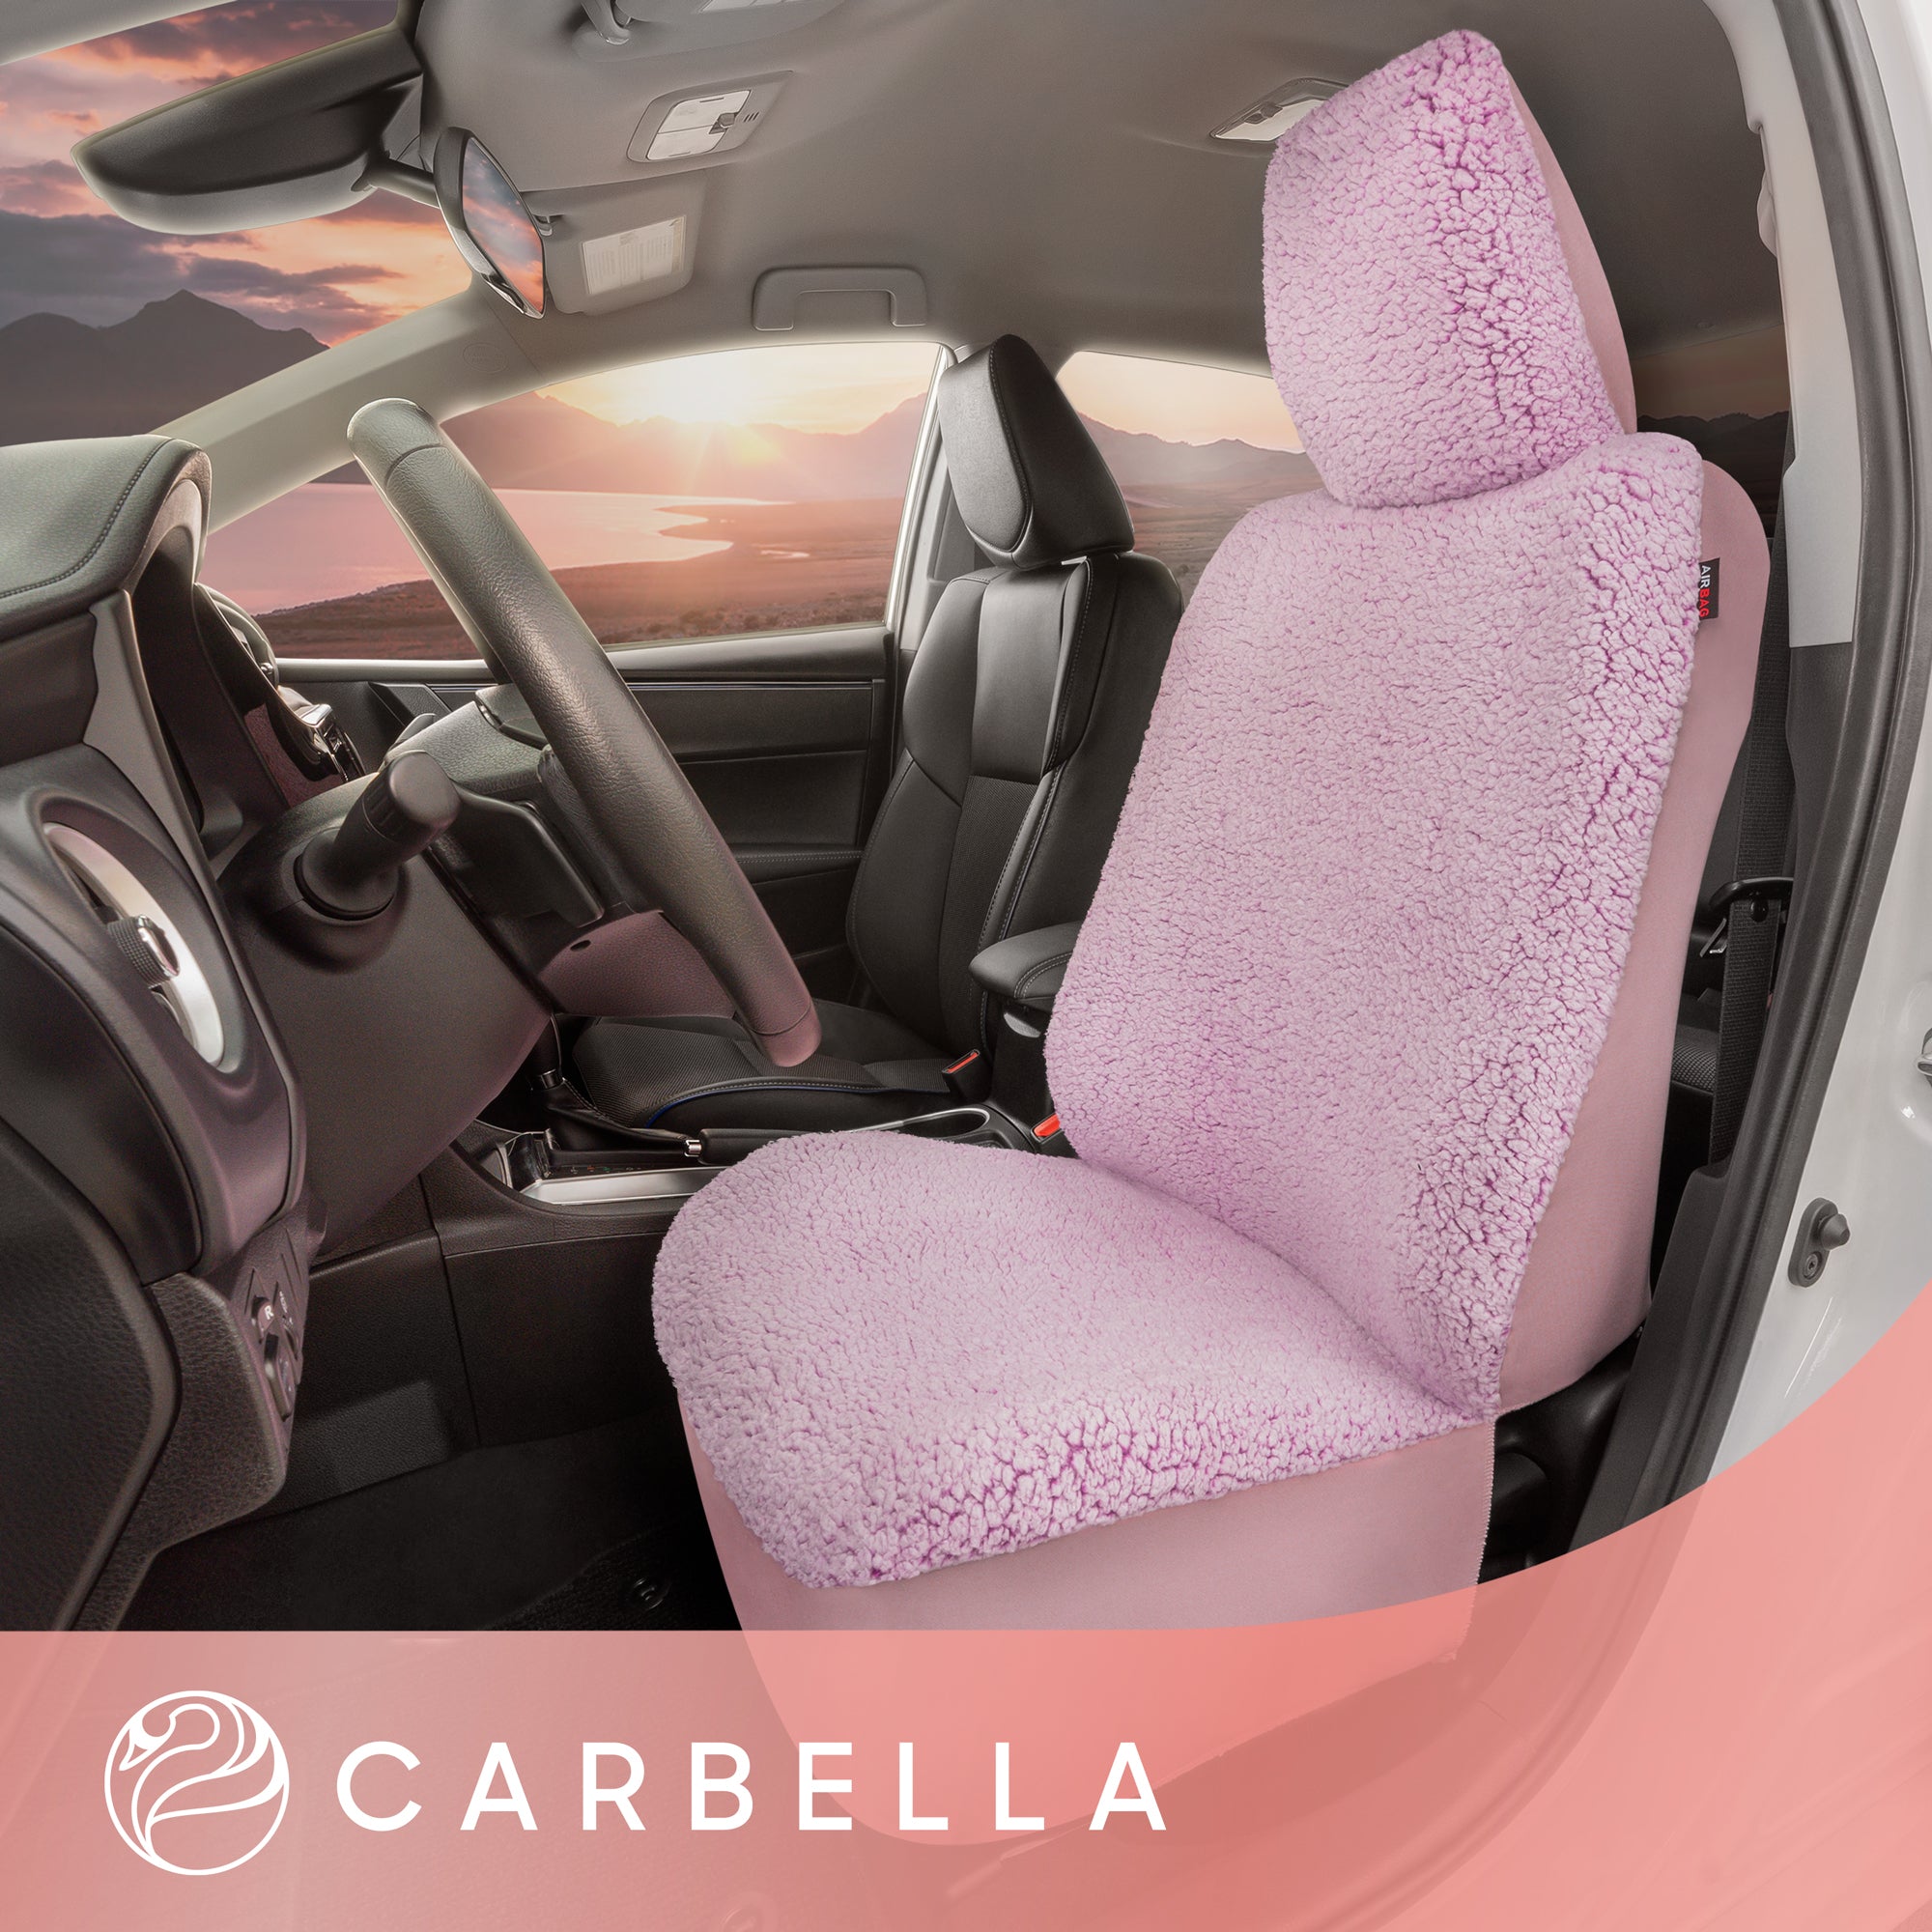 Carbella Plush Sherpa Fleece Car Seat Cover, 1 Piece Pink Seat Cover for Cars with Soft Cushioned Touch, Cute Automotive Interior Protector for Trucks Van SUV, Car Accessories for Women